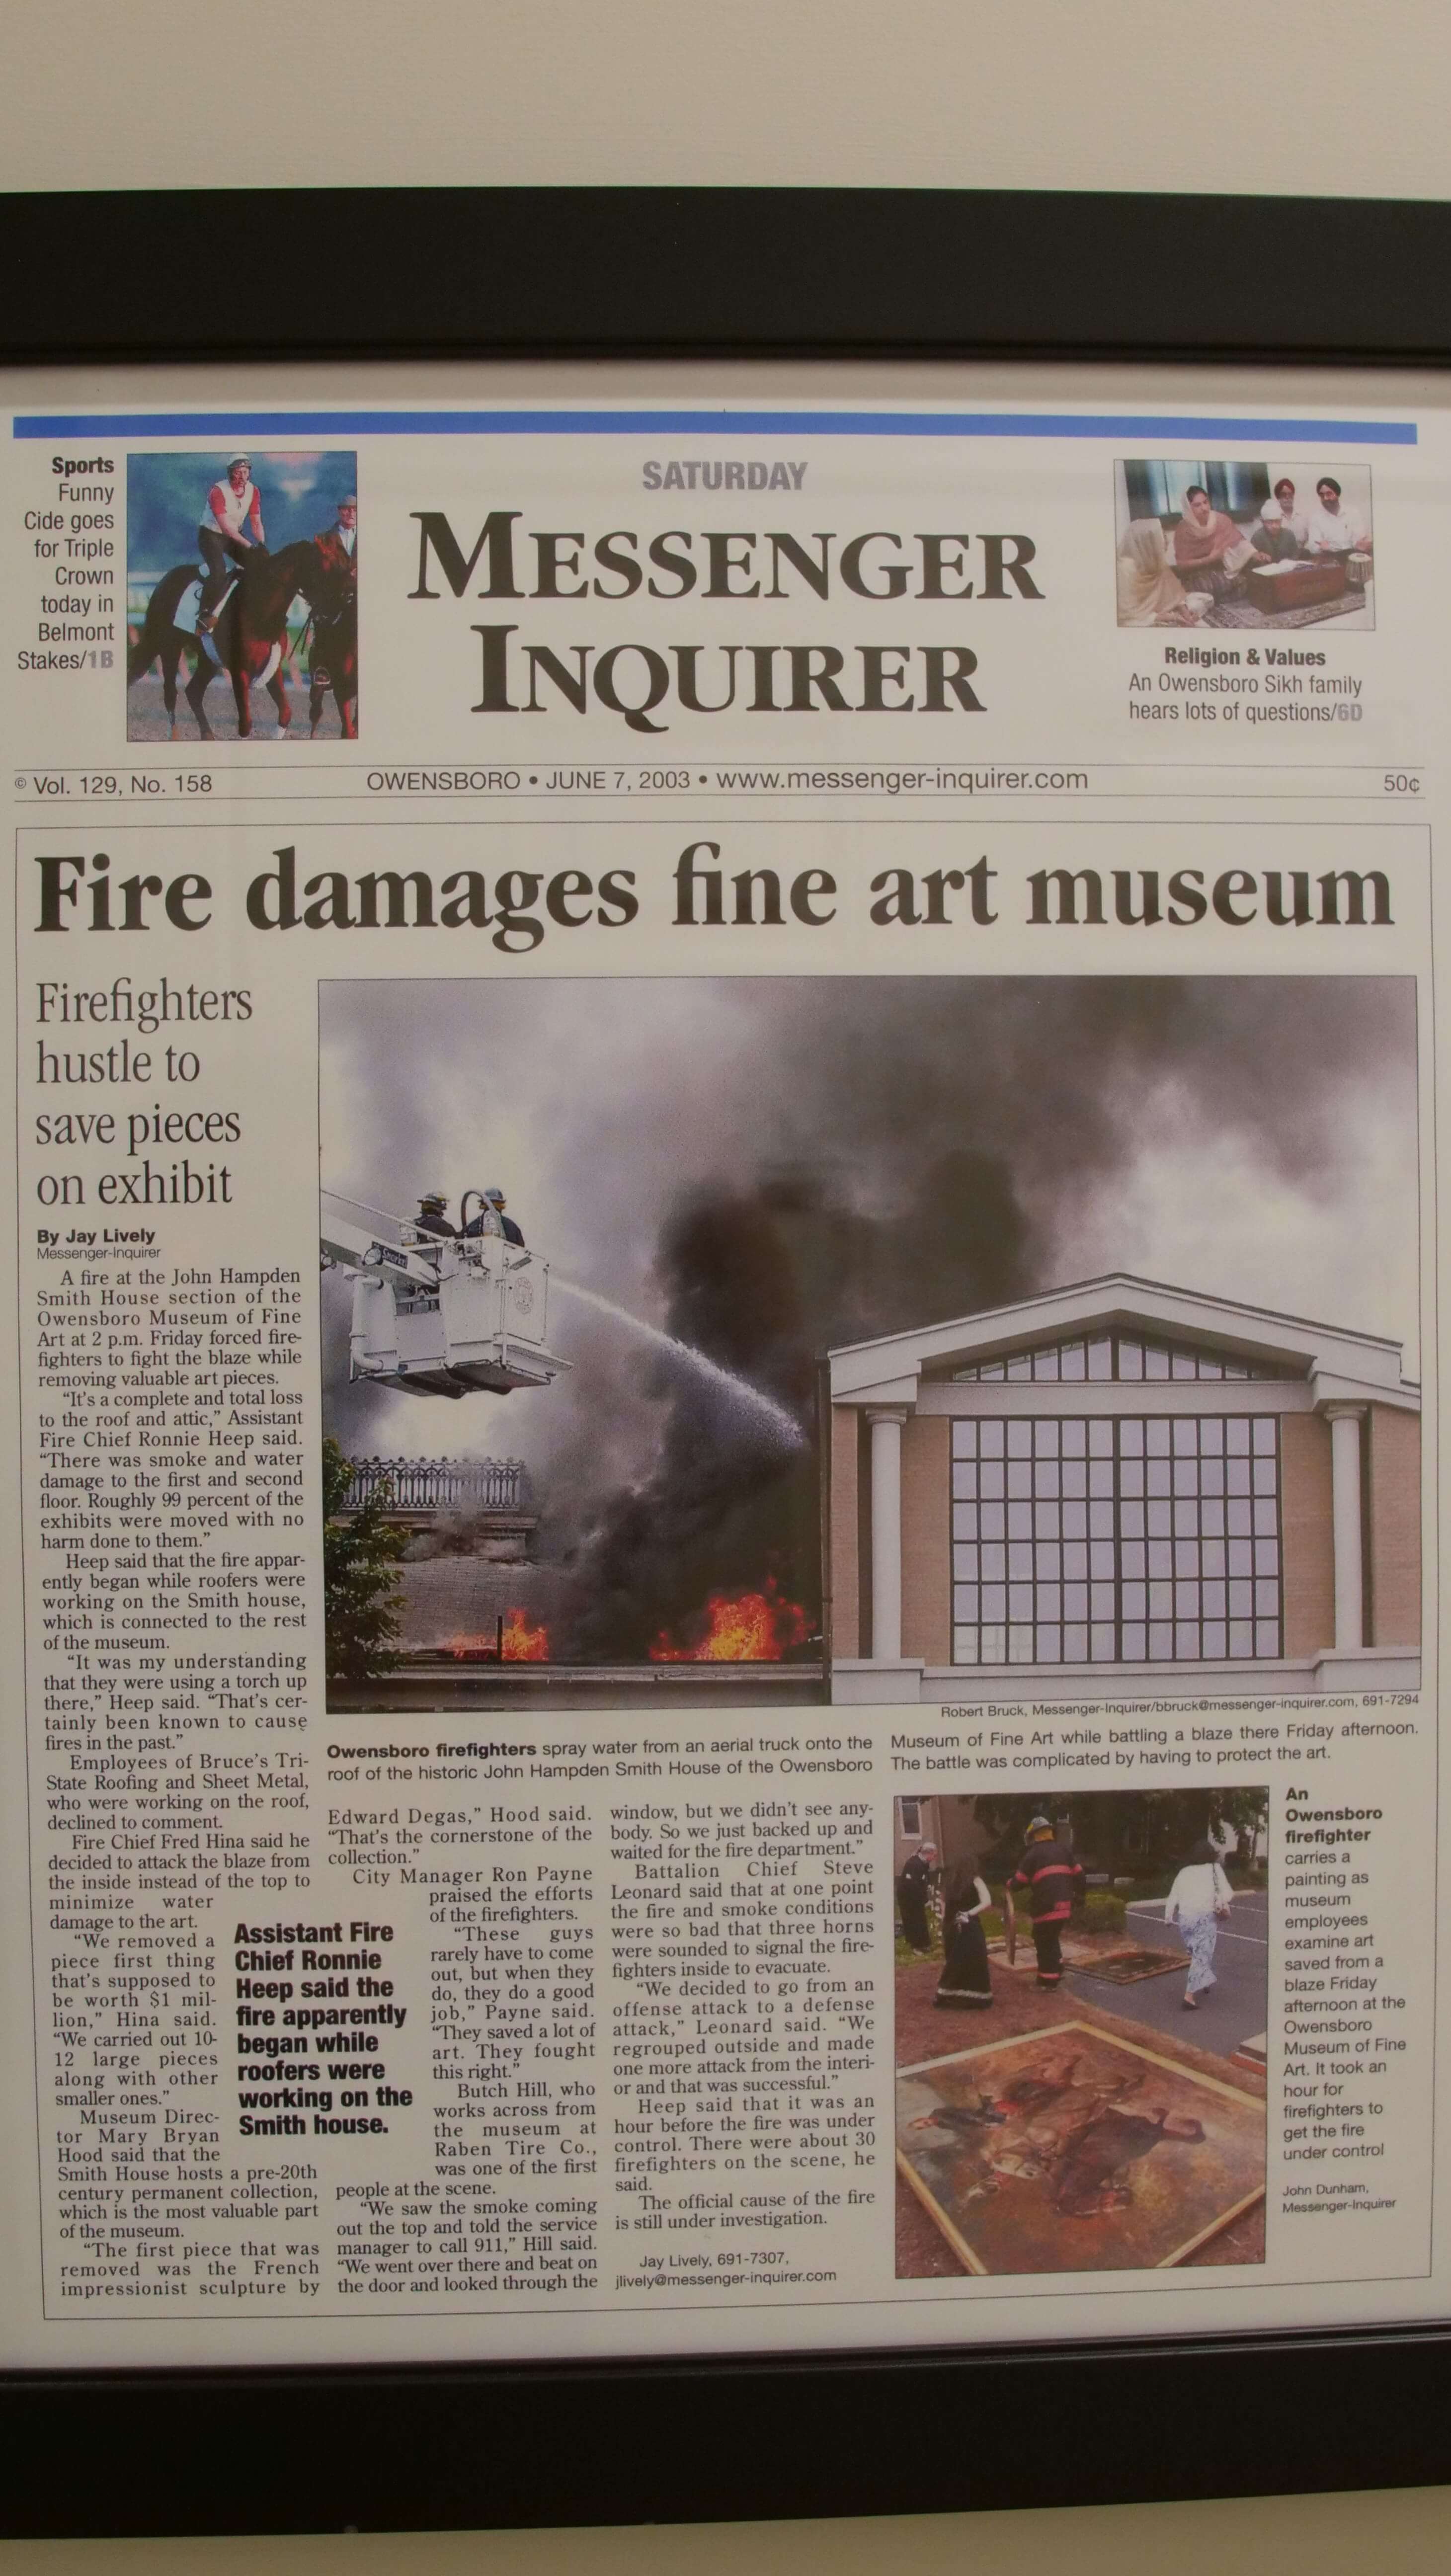 Newspaper showing museum damaged by fire